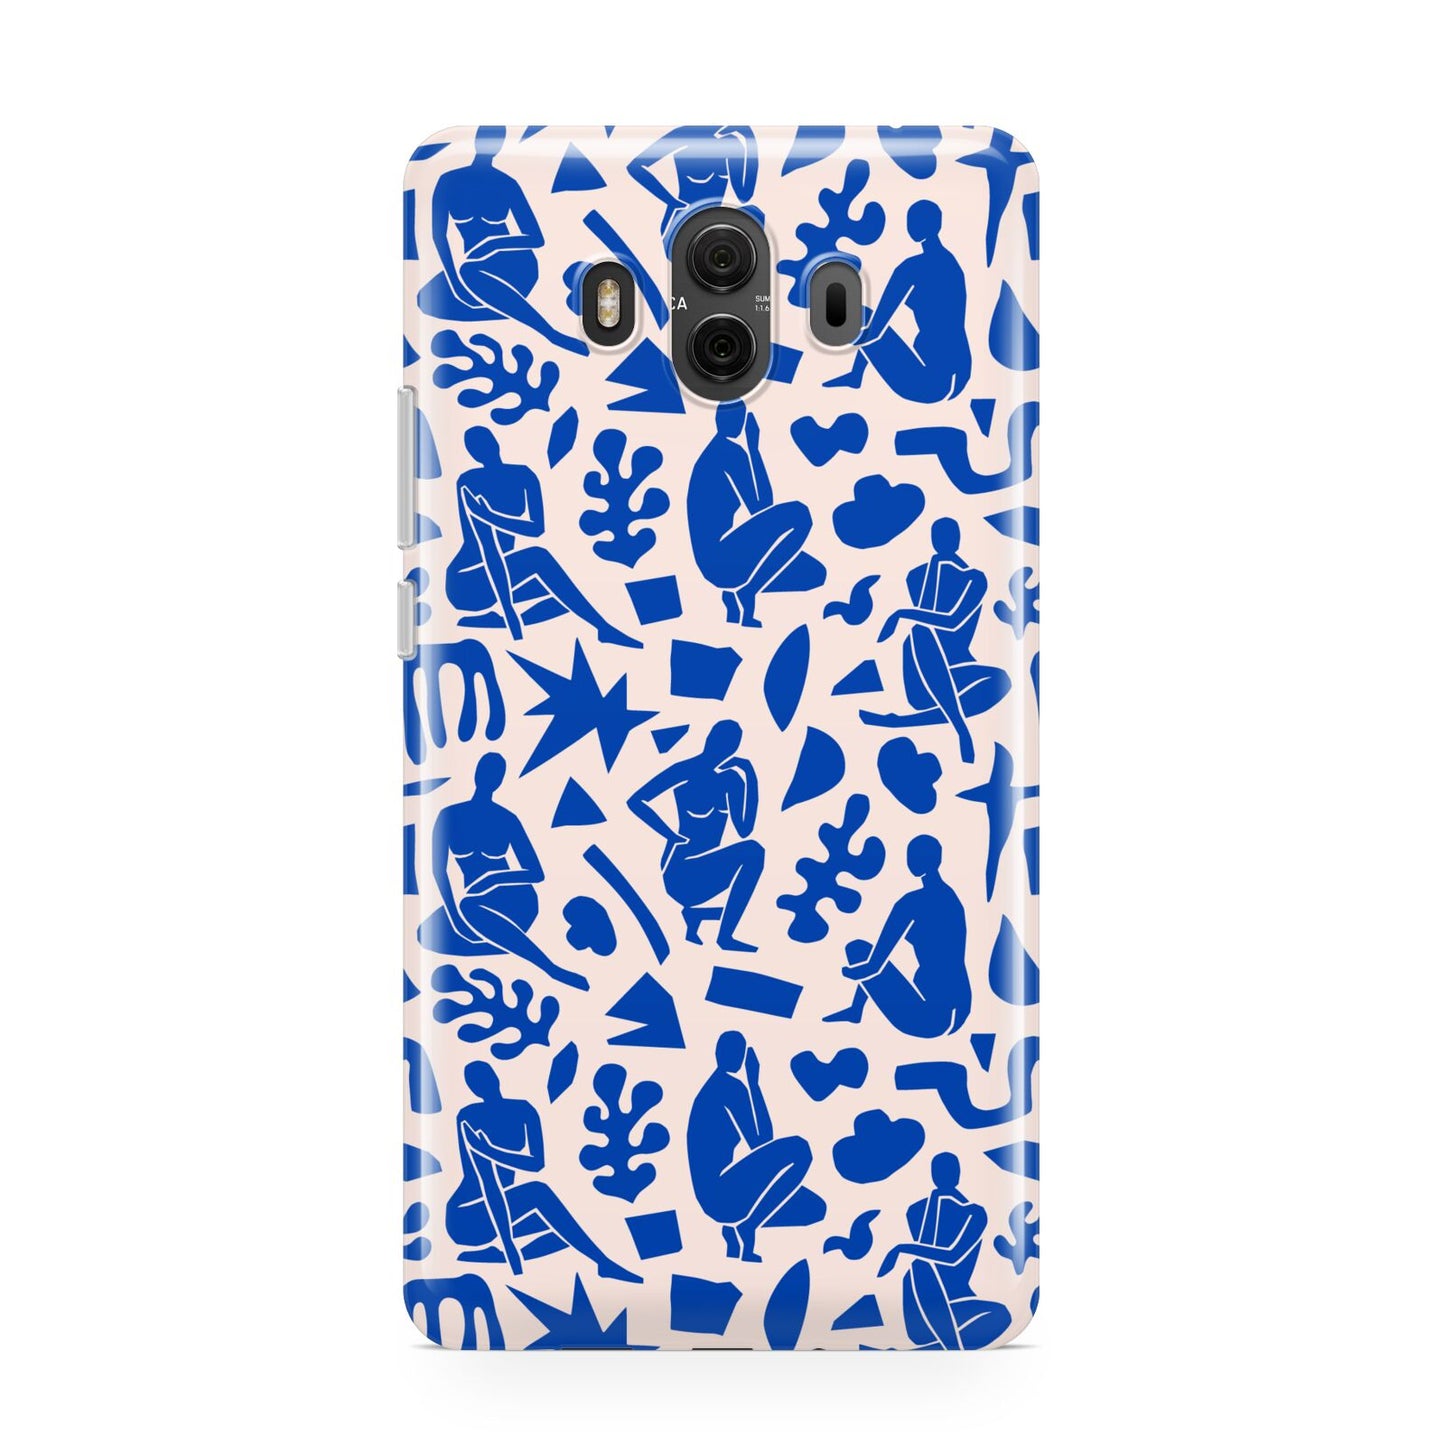 Abstract Art Huawei Mate 10 Protective Phone Case